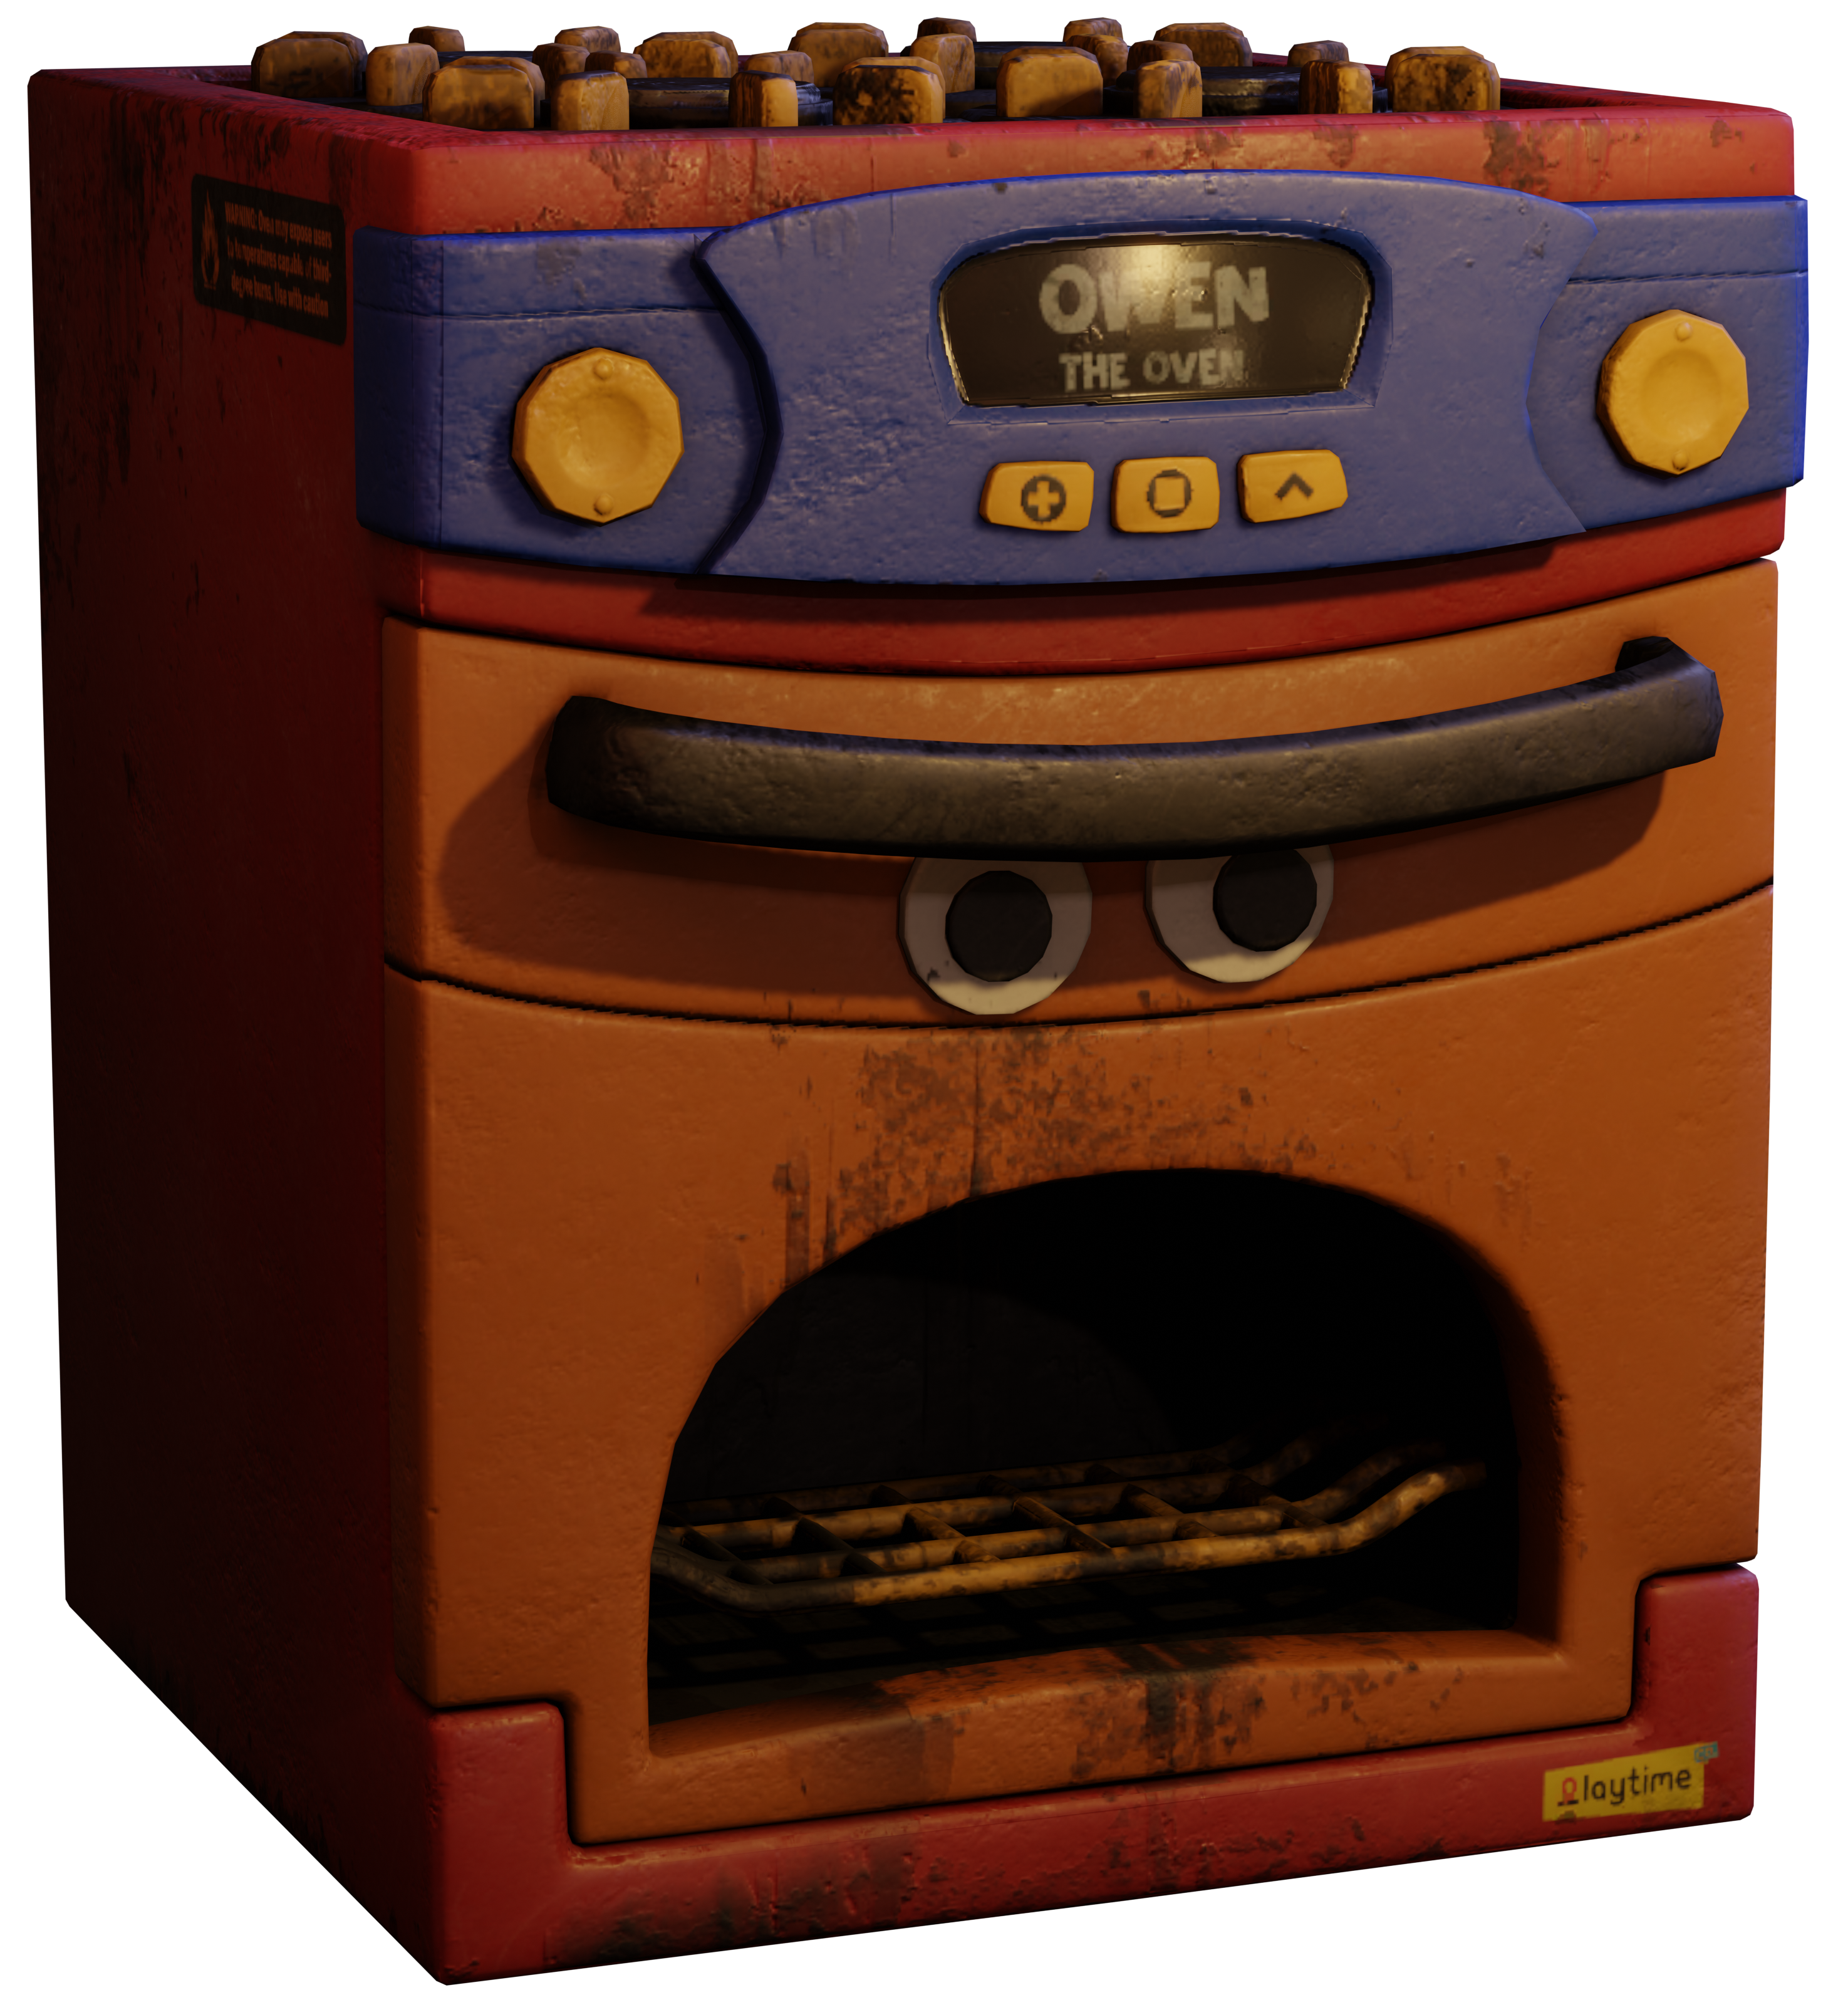 https://static.wikia.nocookie.net/pplaytime/images/2/25/Owen_The_Oven.png/revision/latest?cb=20220508210512